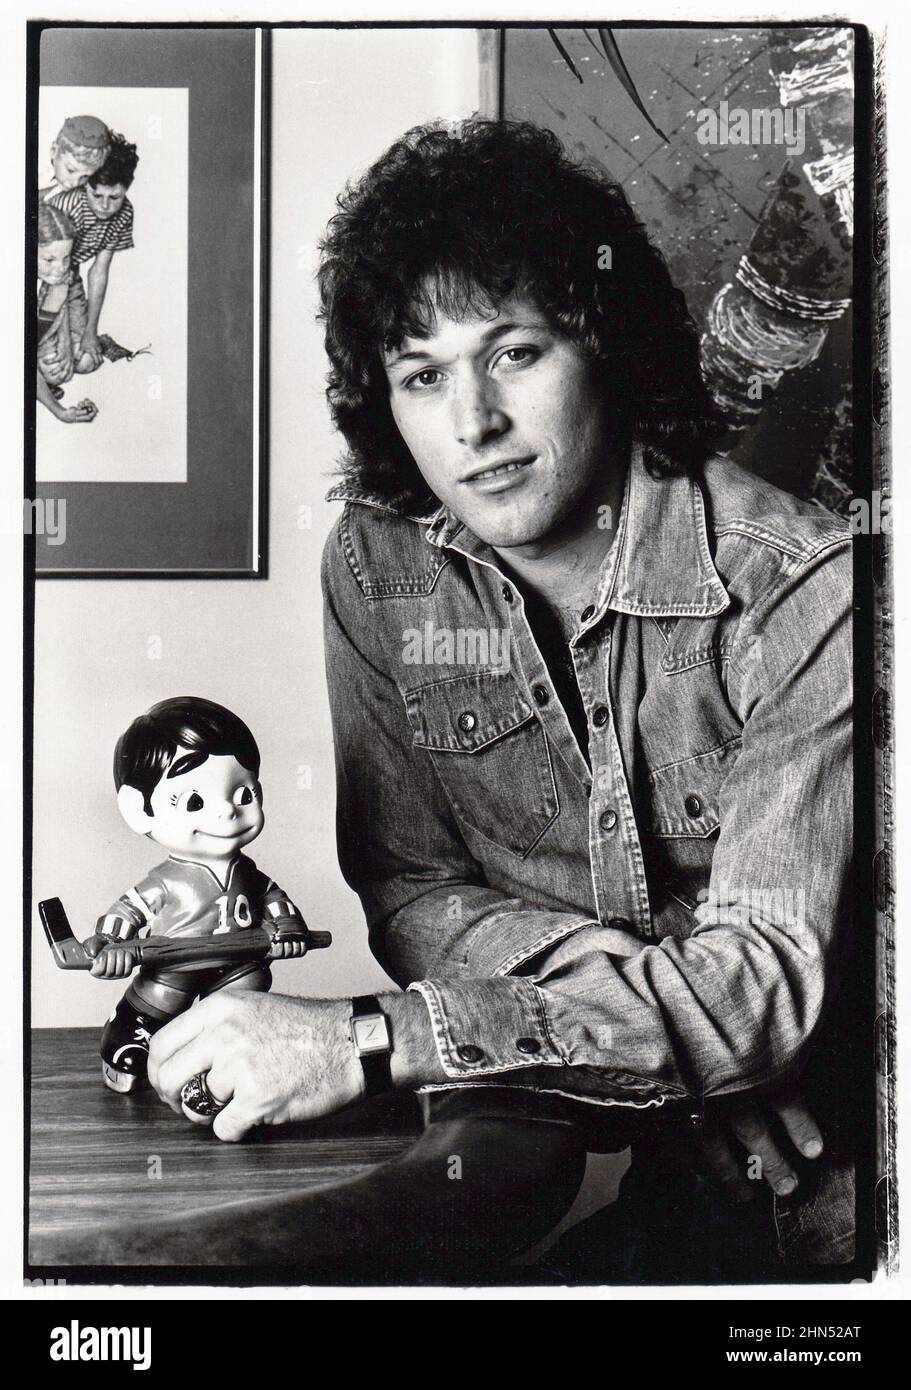 A 1979 portrait of New York Rangers center Ron Duguay in his Upper East Side apartment in New York City. He was also a coach and TV analyst. Stock Photo